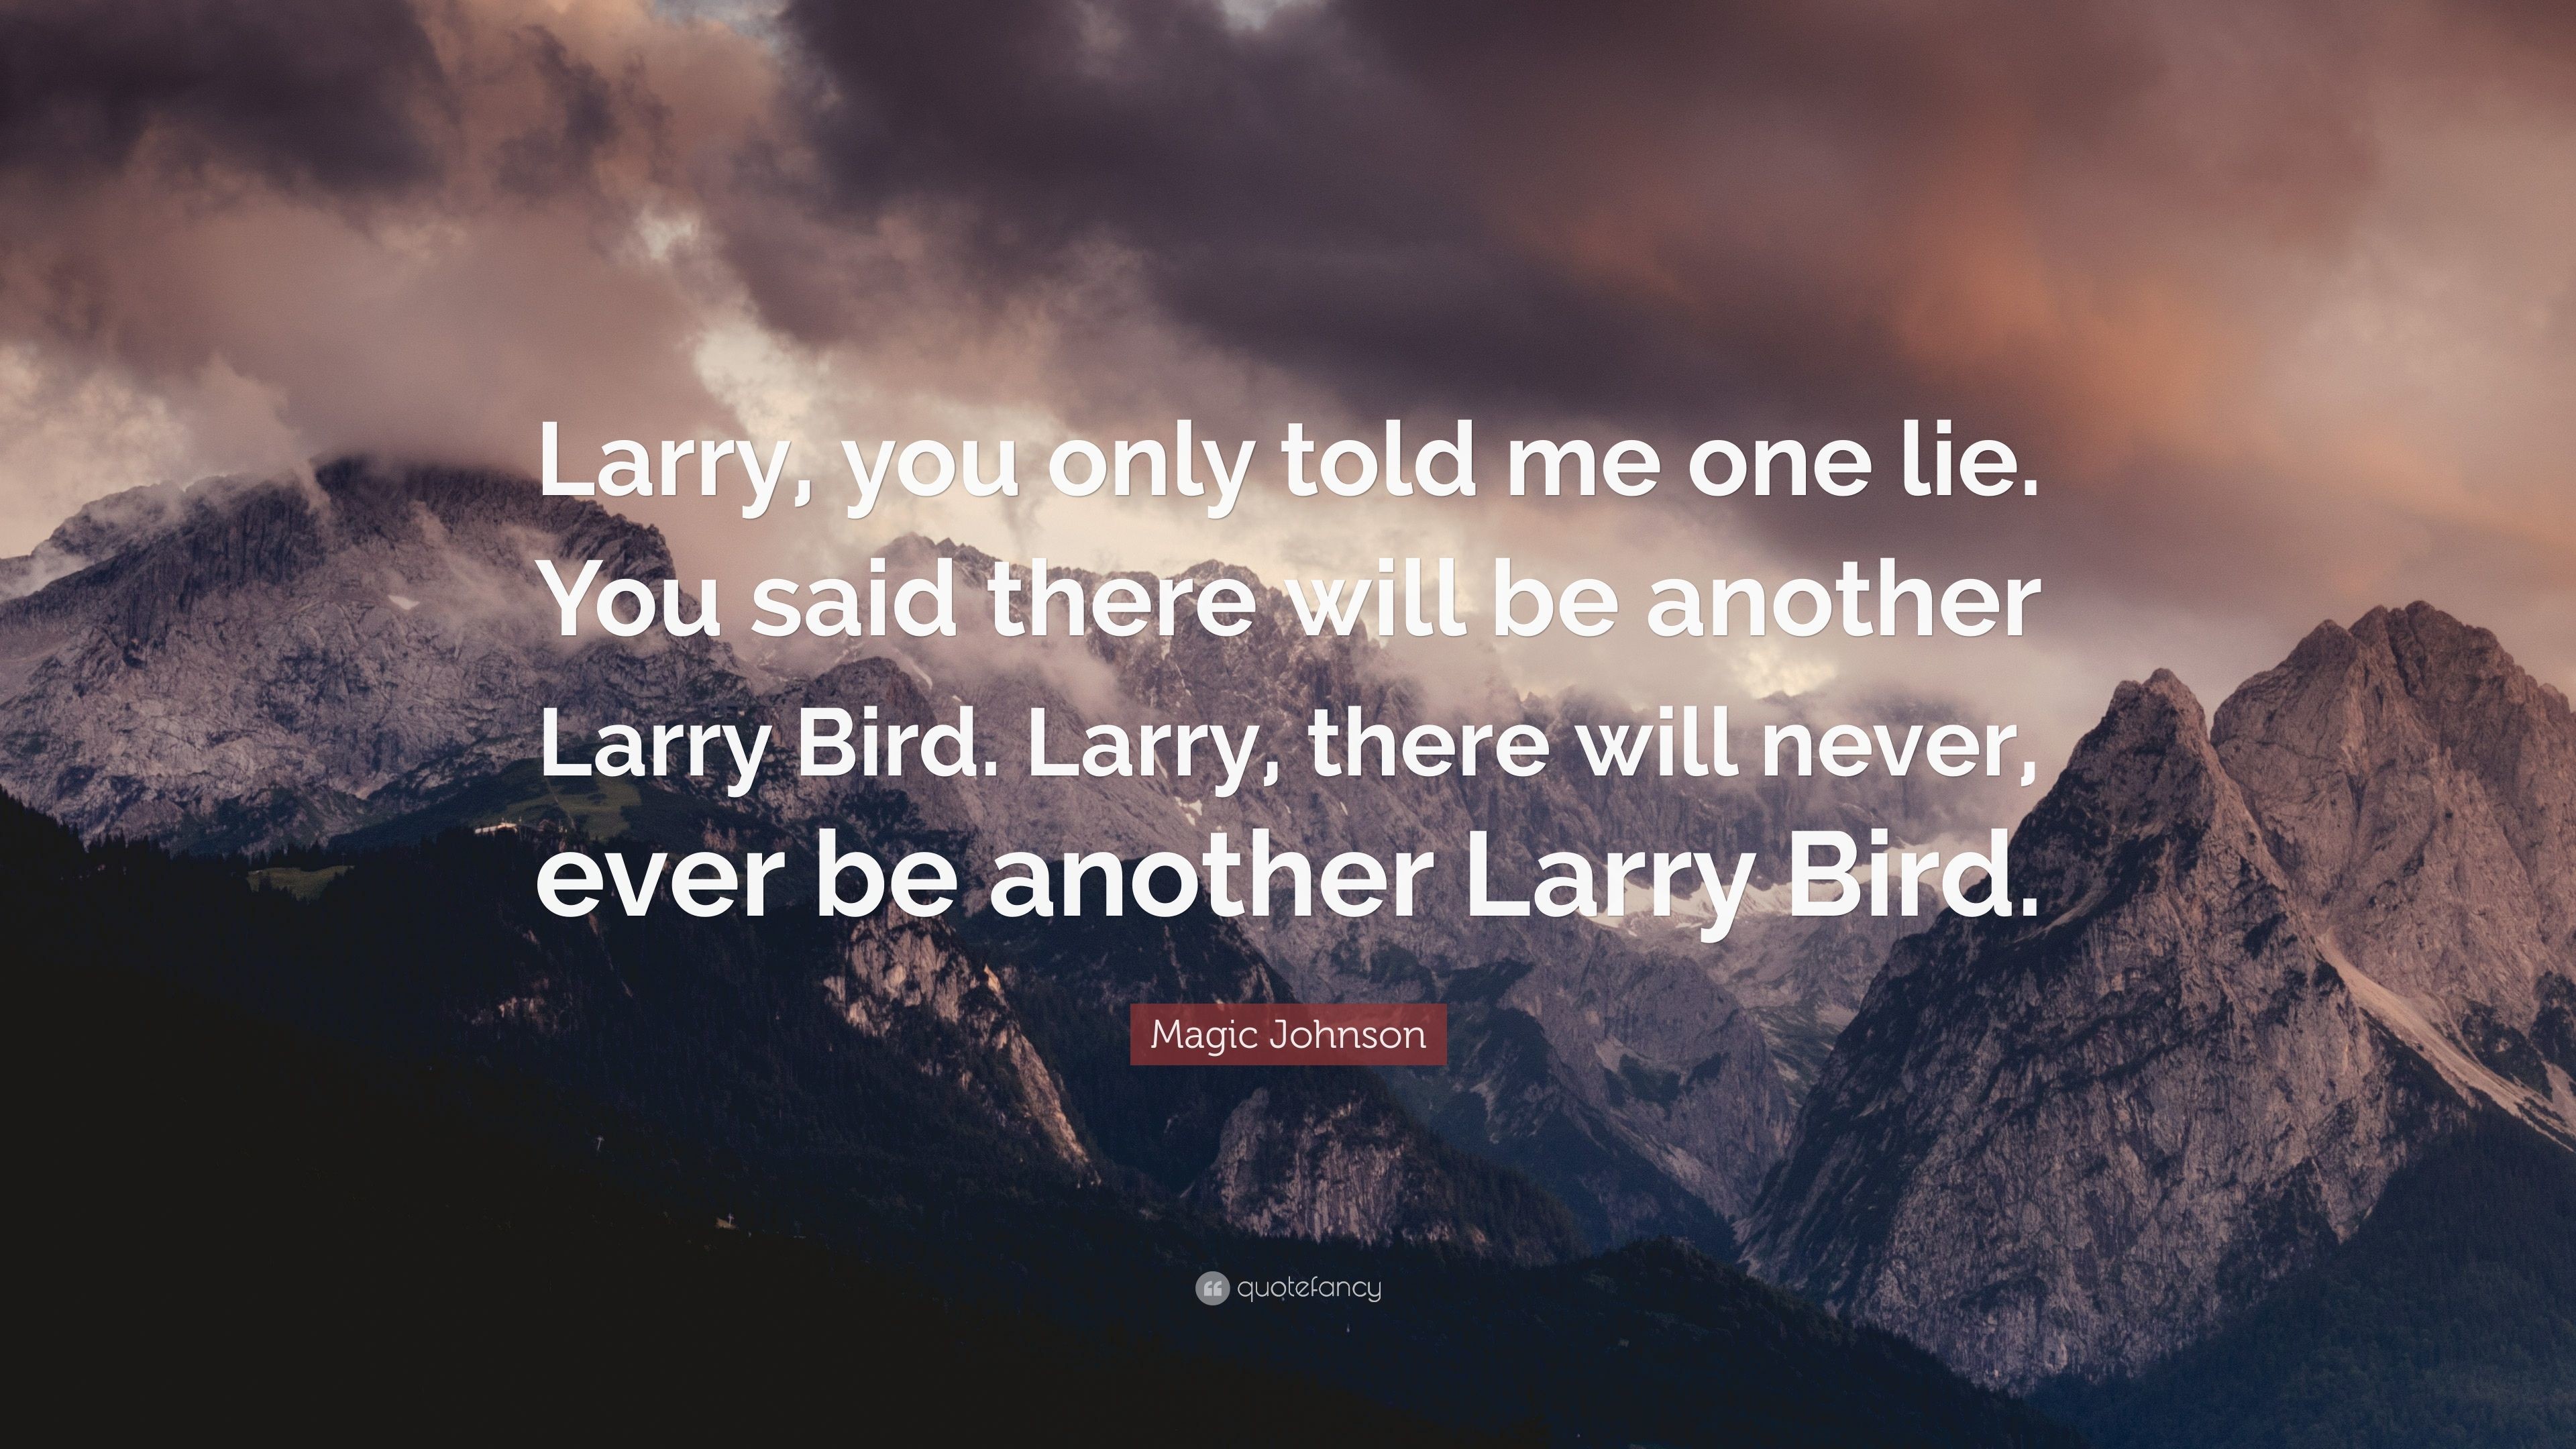 3840x2160 Magic Johnson Quote: “Larry, you only told me one lie. You said